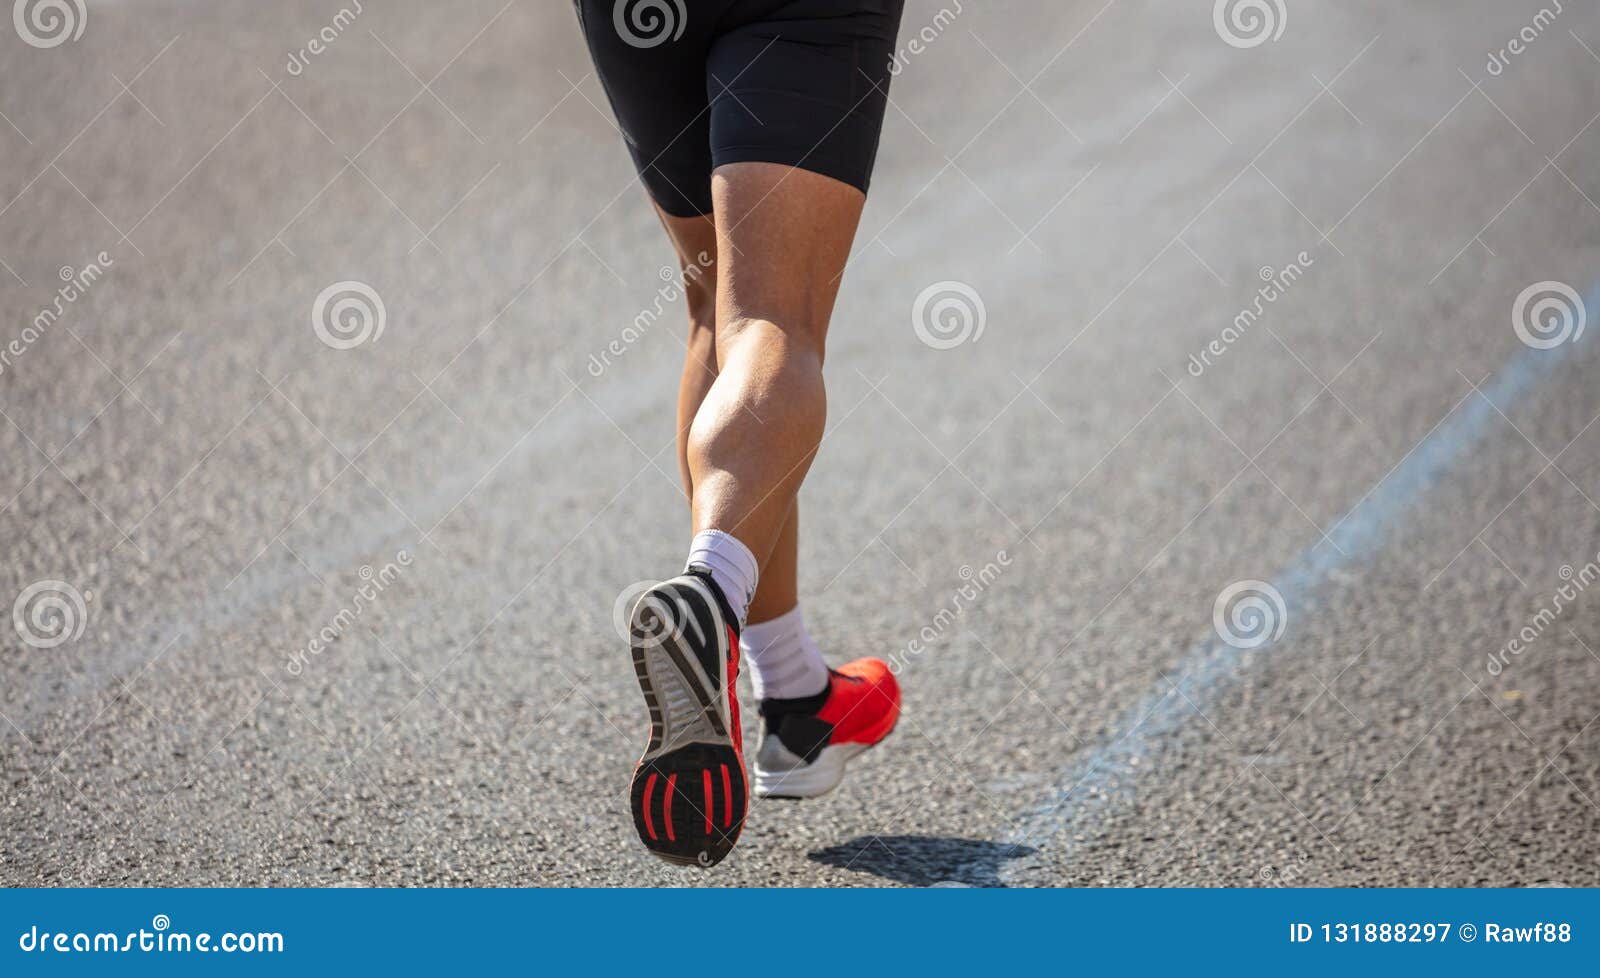 Running in the City Roads. Young Man Runner, Back View, Blur Background ...